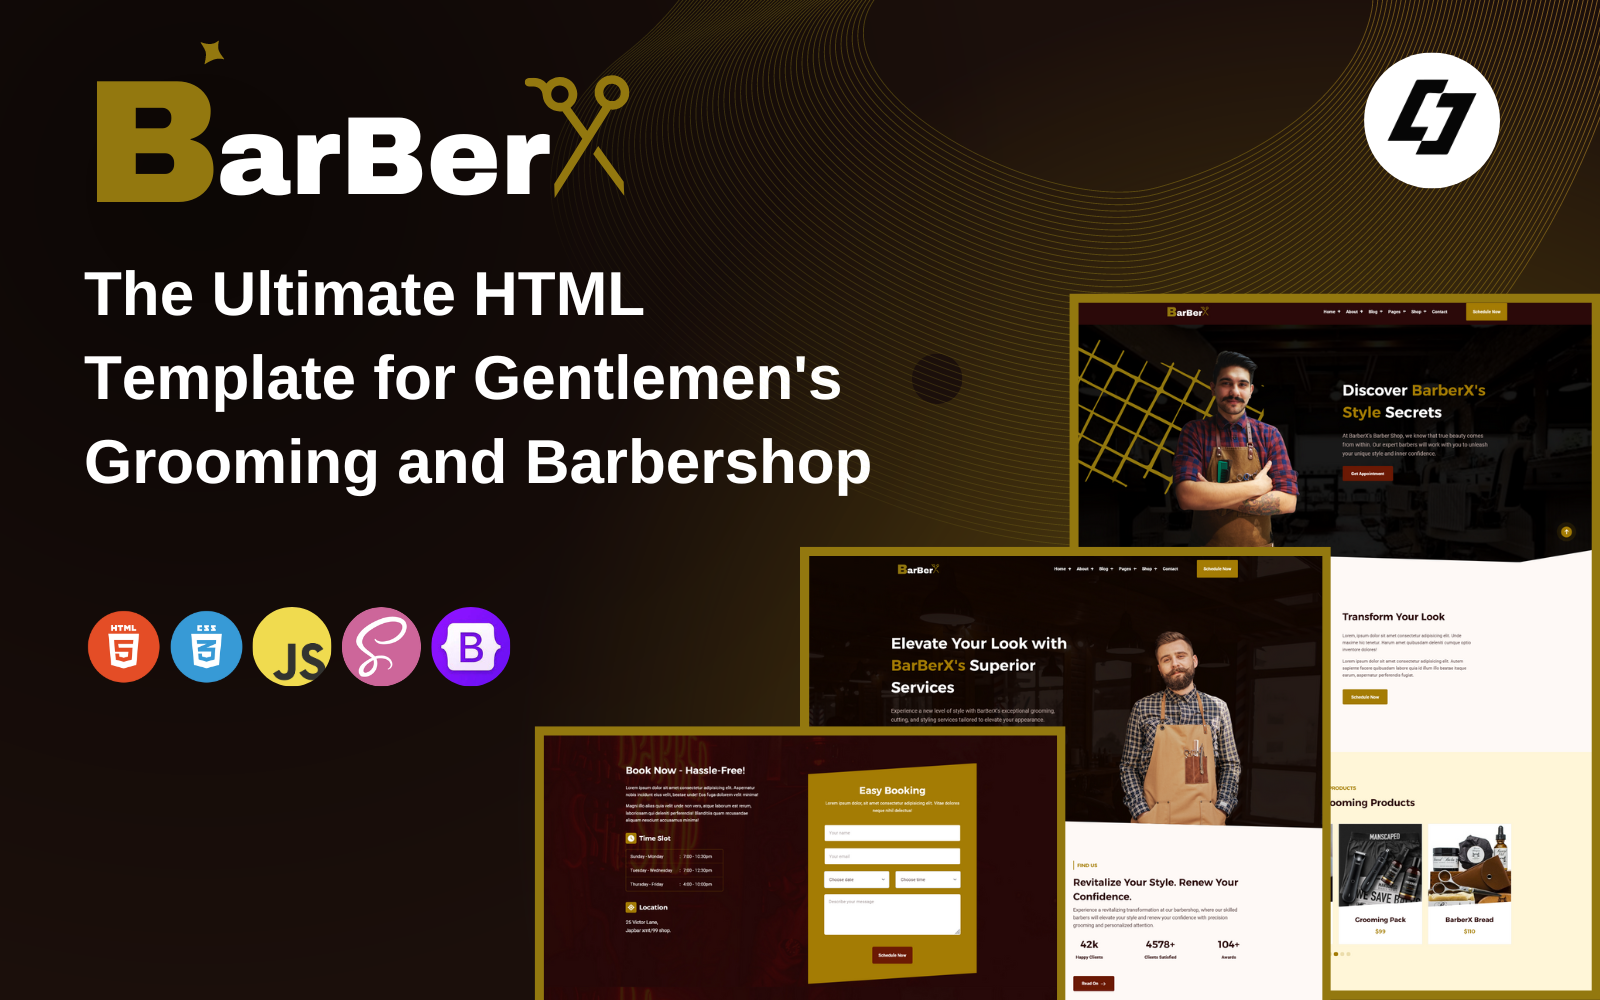 BarberX - The Best HTML Template for Barbershops and Grooming Salons: Modern, Sleek, and Responsive